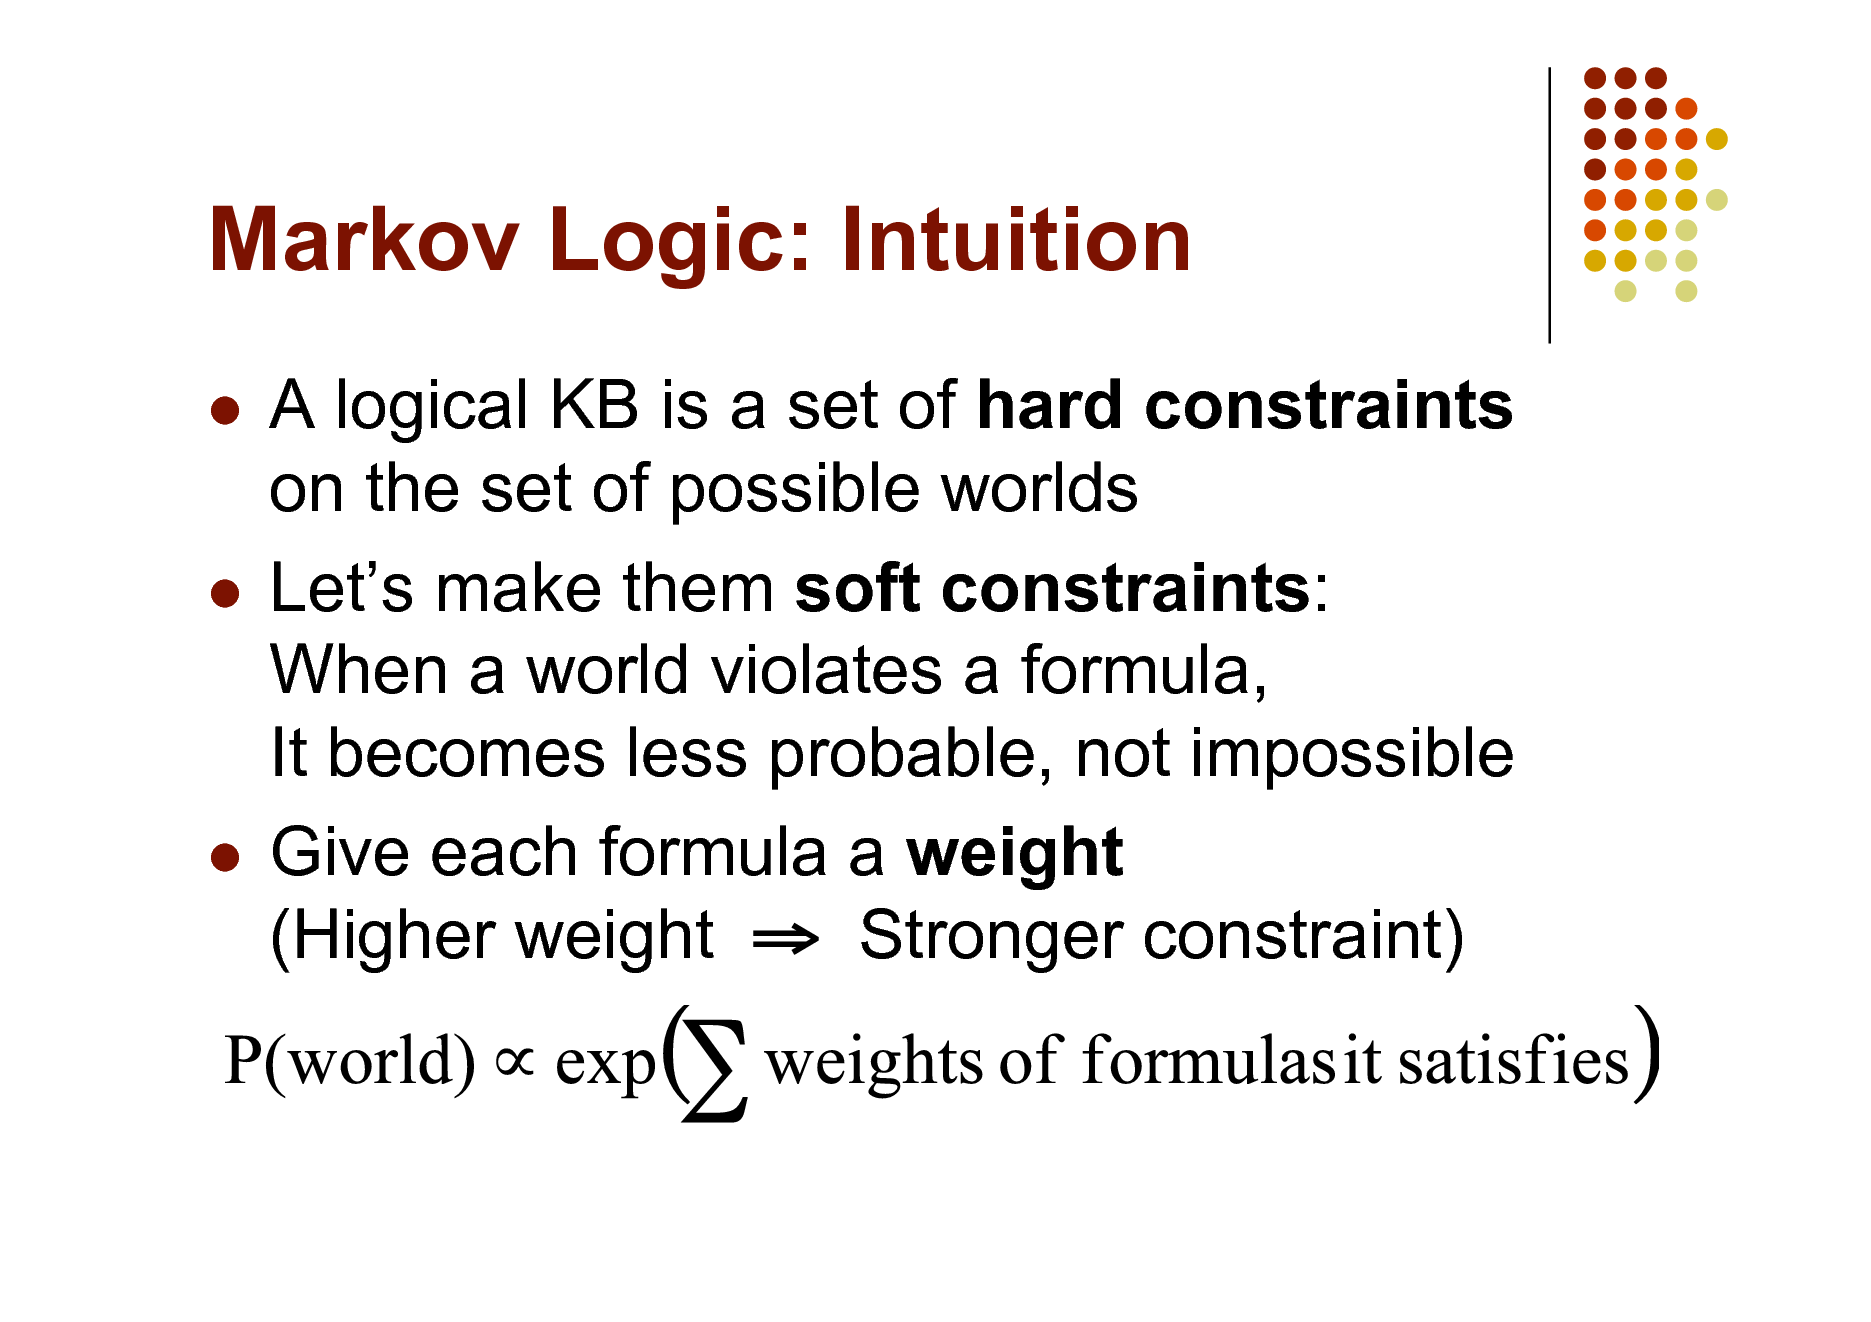 Slide: Markov Logic: Intuition
A logical KB is a set of hard constraints on the set of possible worlds  Lets make them soft constraints: When a world violates a formula, It becomes less probable, not impossible  Give each formula a weight (Higher weight  Stronger constraint)


